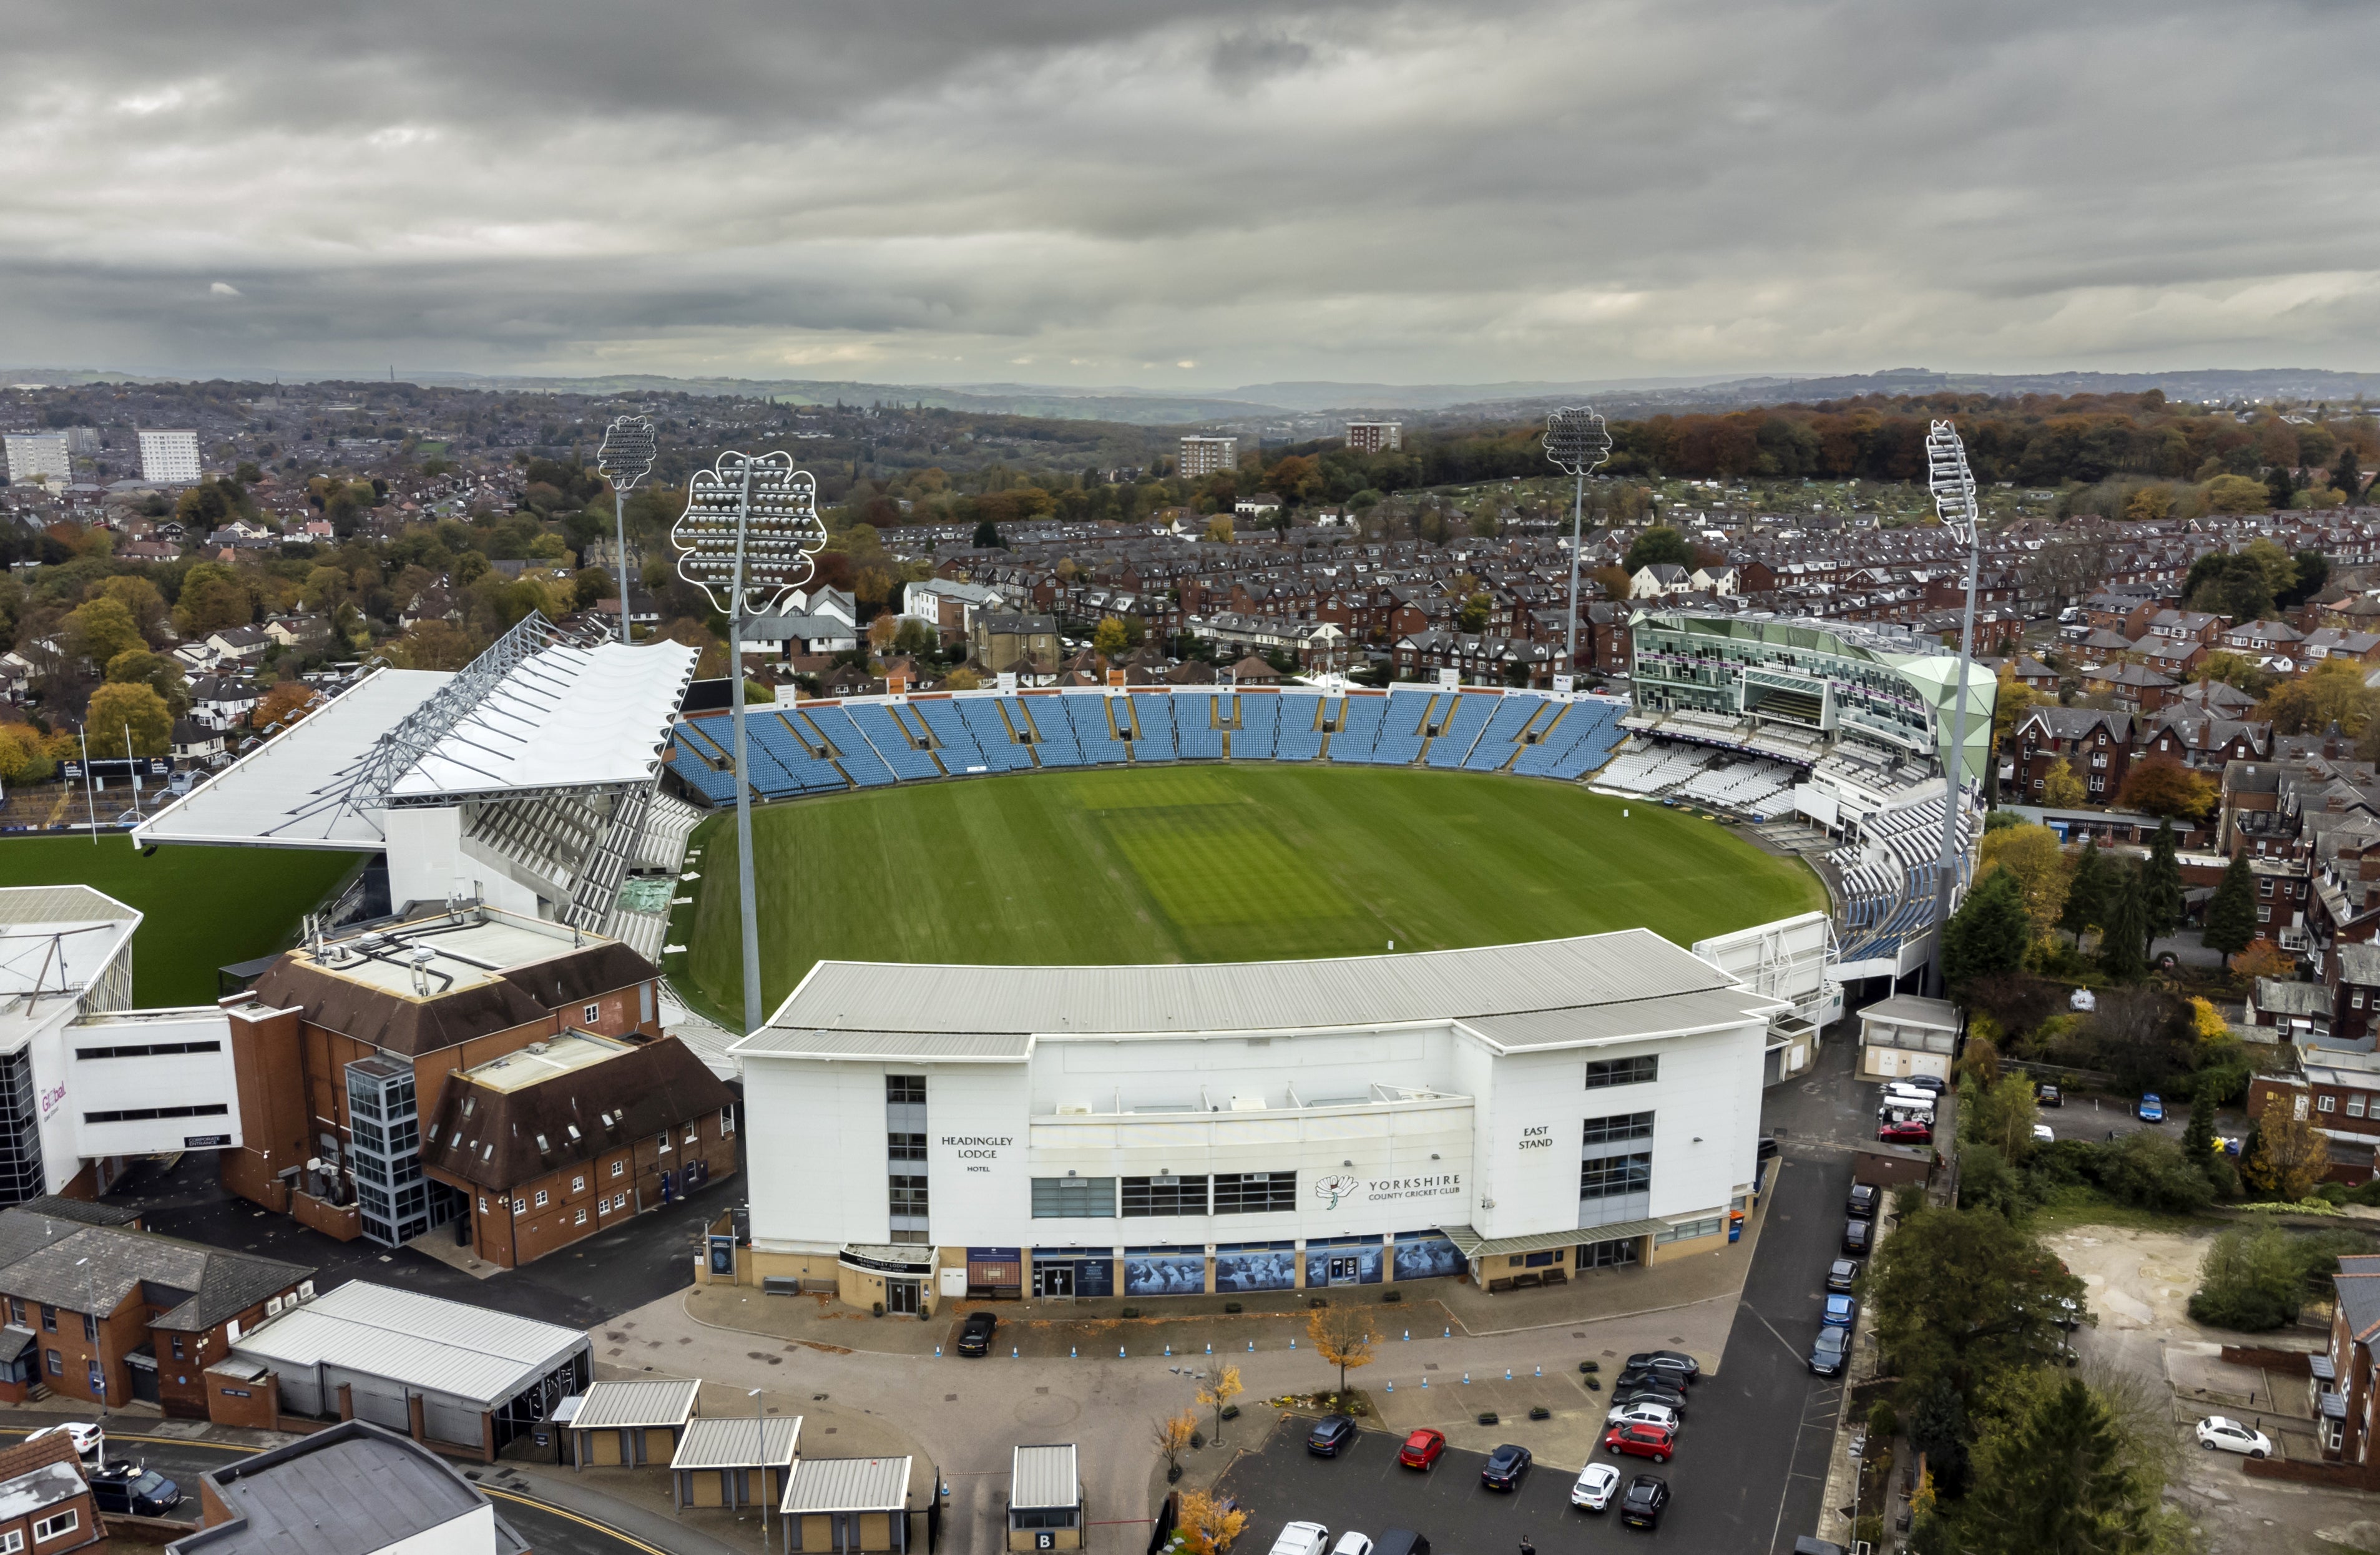 International cricket is set to return to Headingley this summer after the ECB conditionally restored Yorkshire’s right to host matches (Danny Lawson/PA)